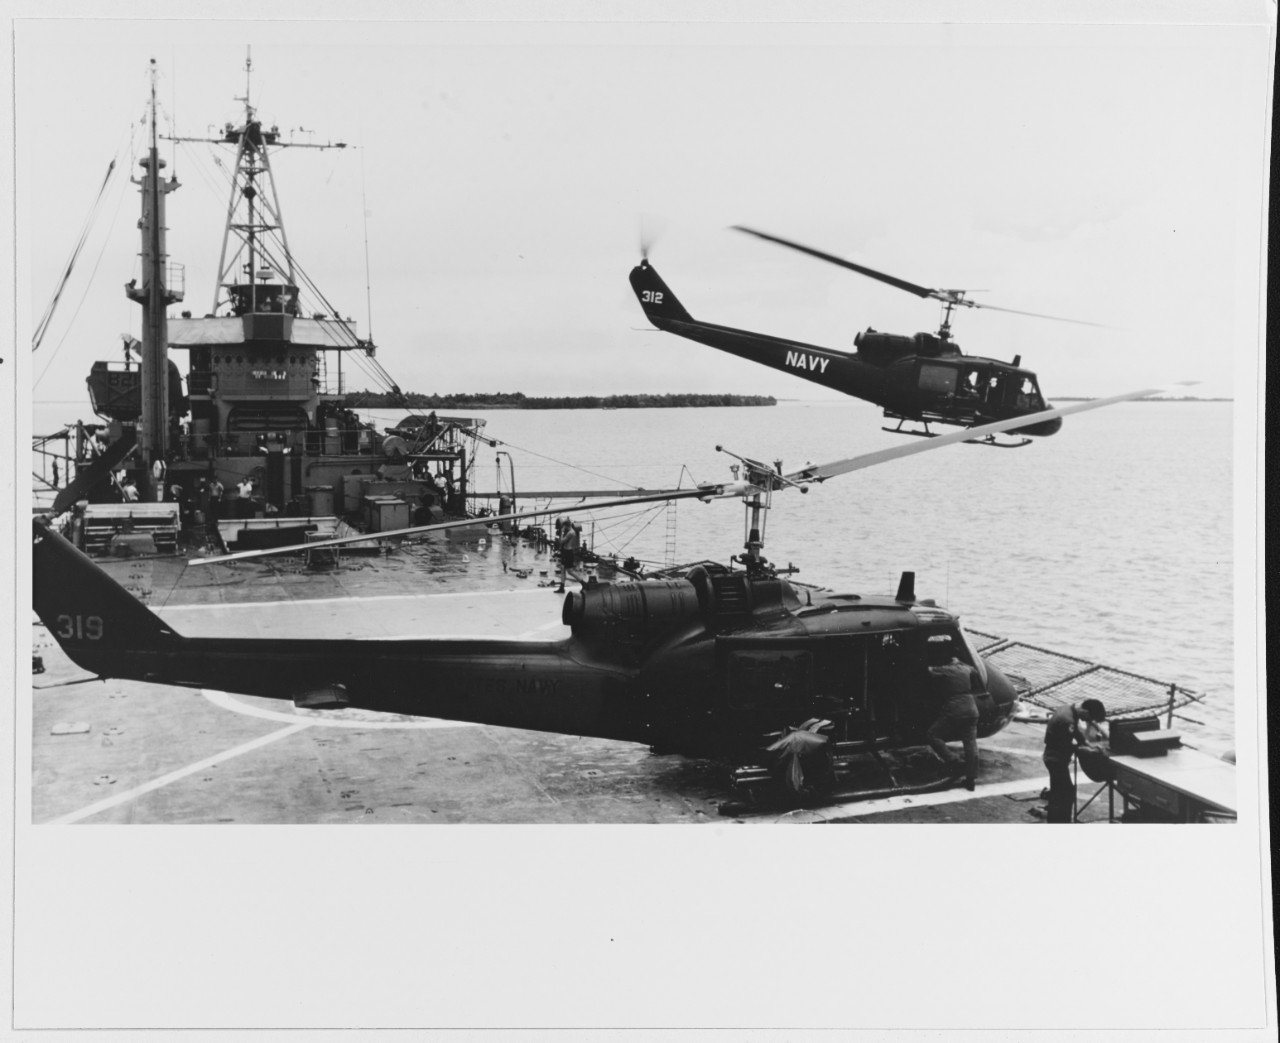 U.S. Navy UH-1B IROQUOIS Helicopter